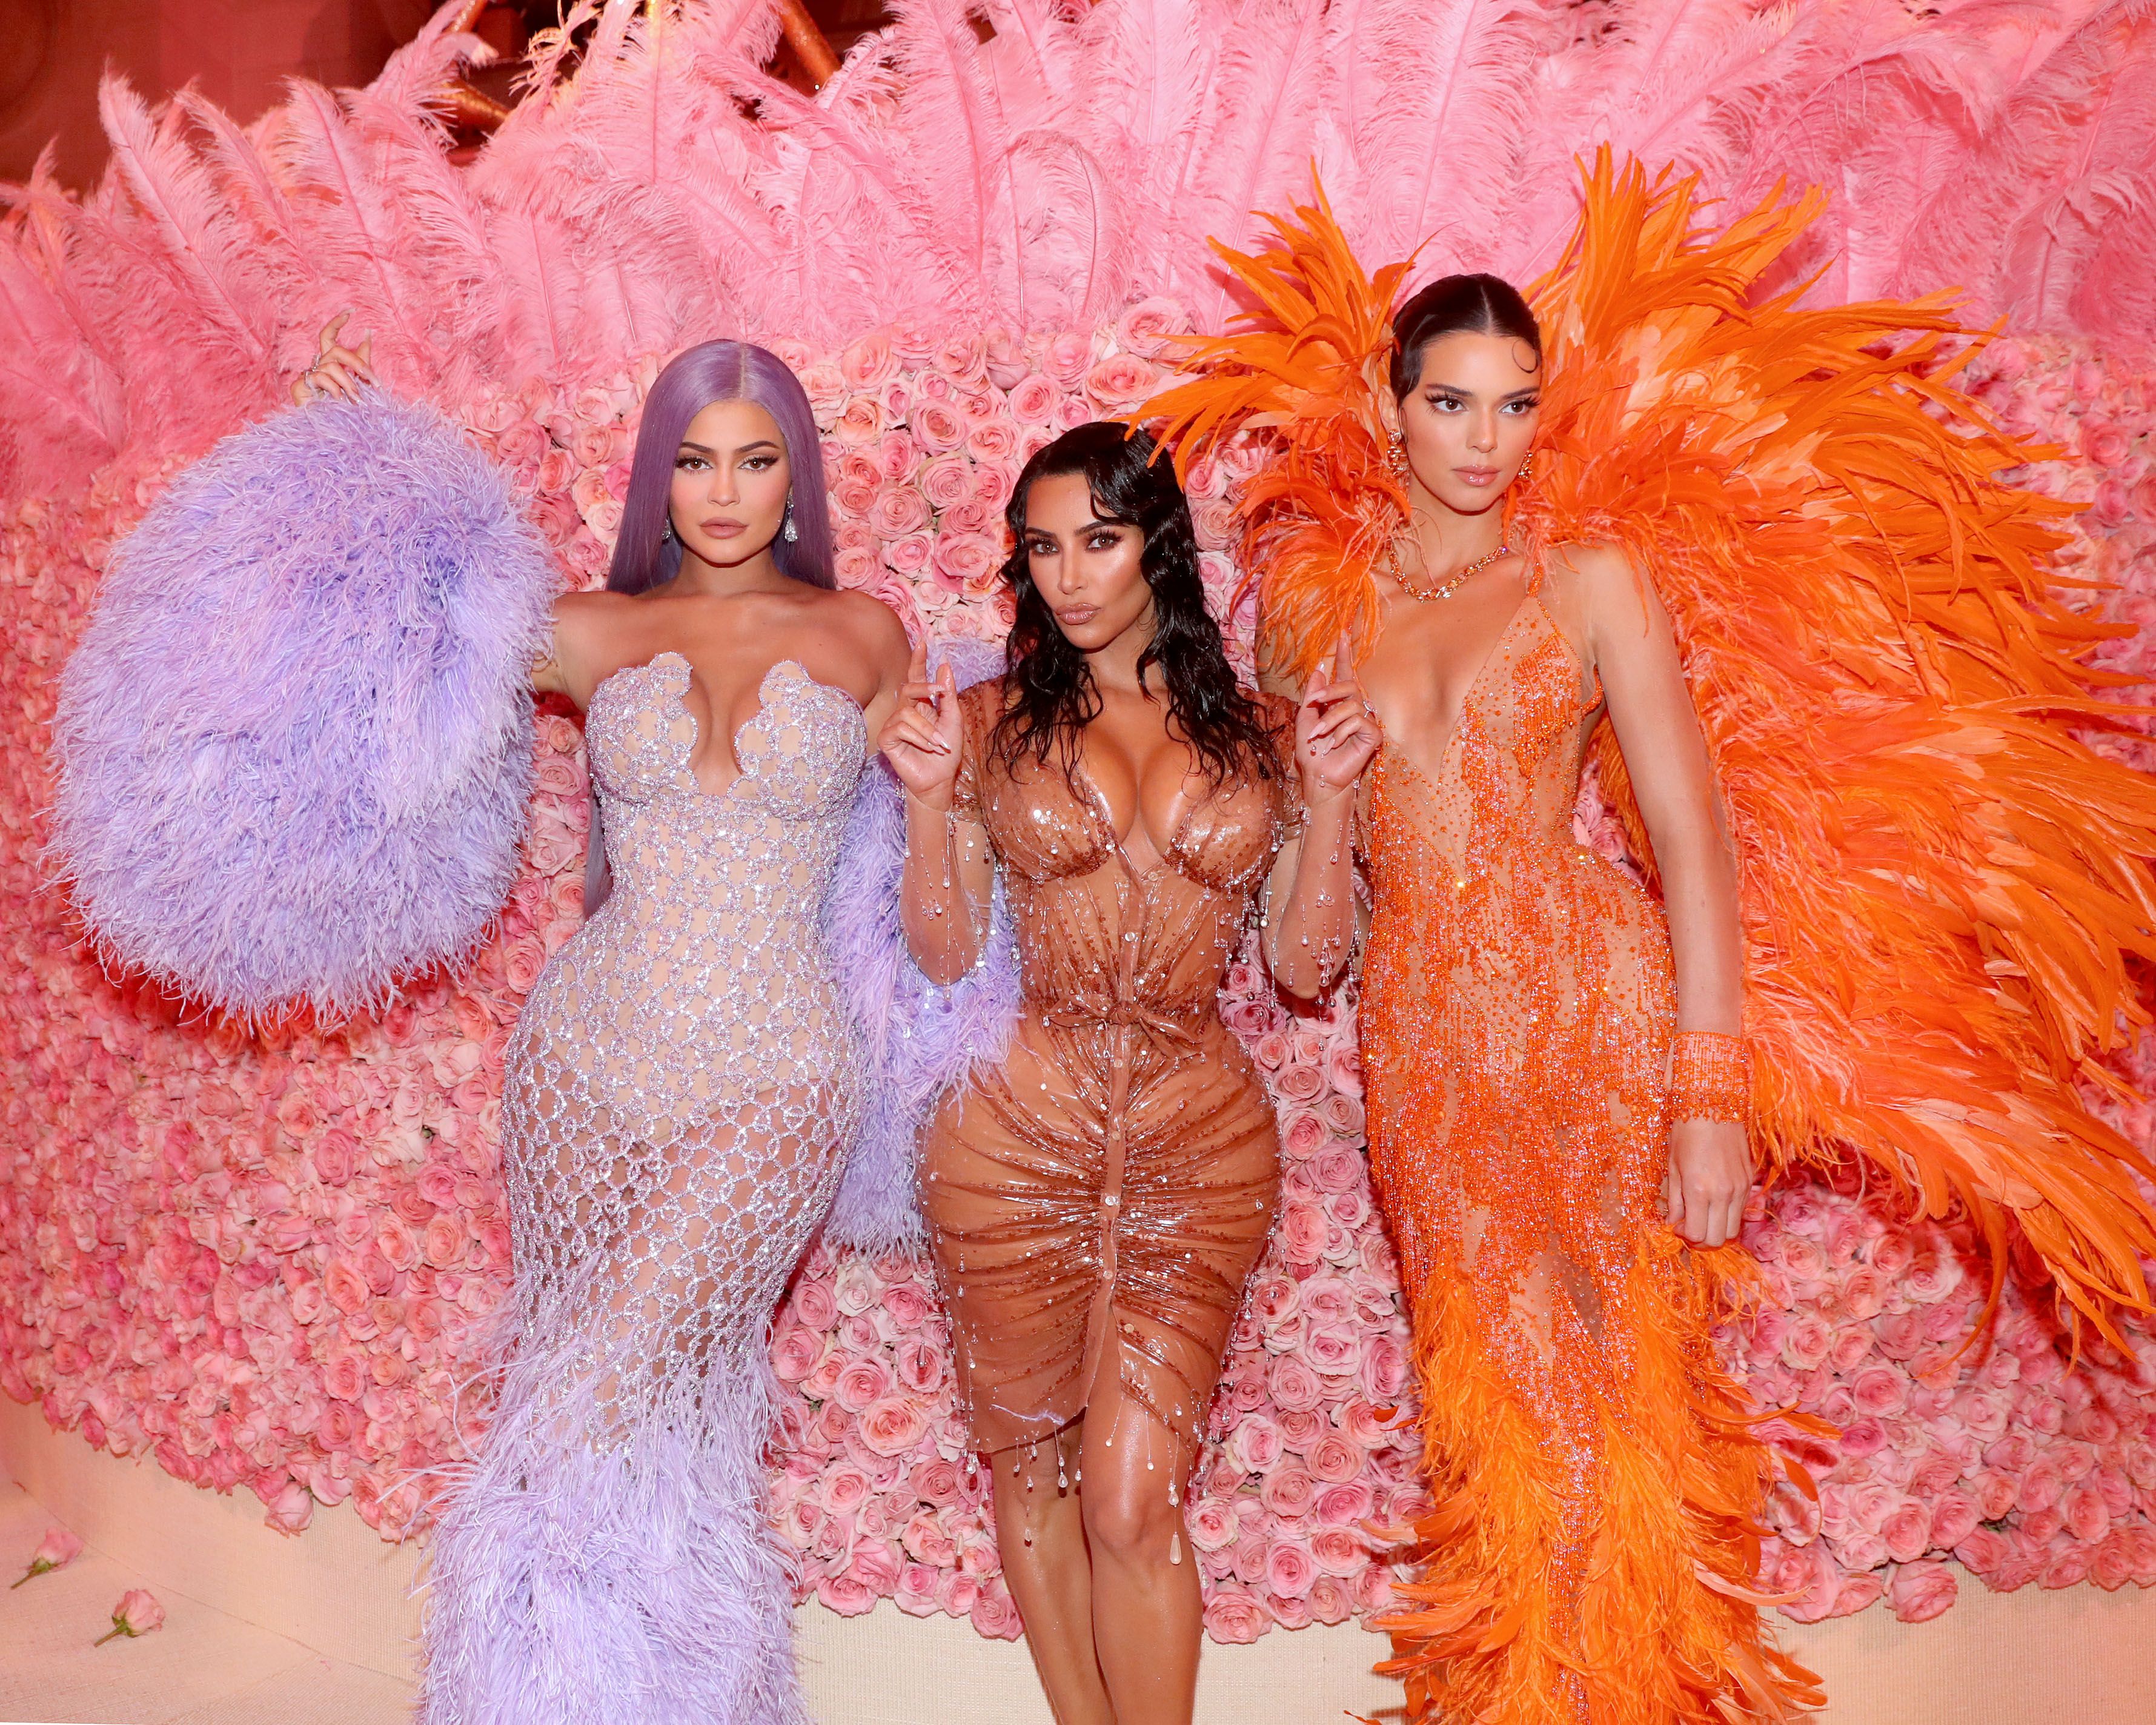 Met Gala 2021: Date, Theme and Seating Chart for This Year's Event